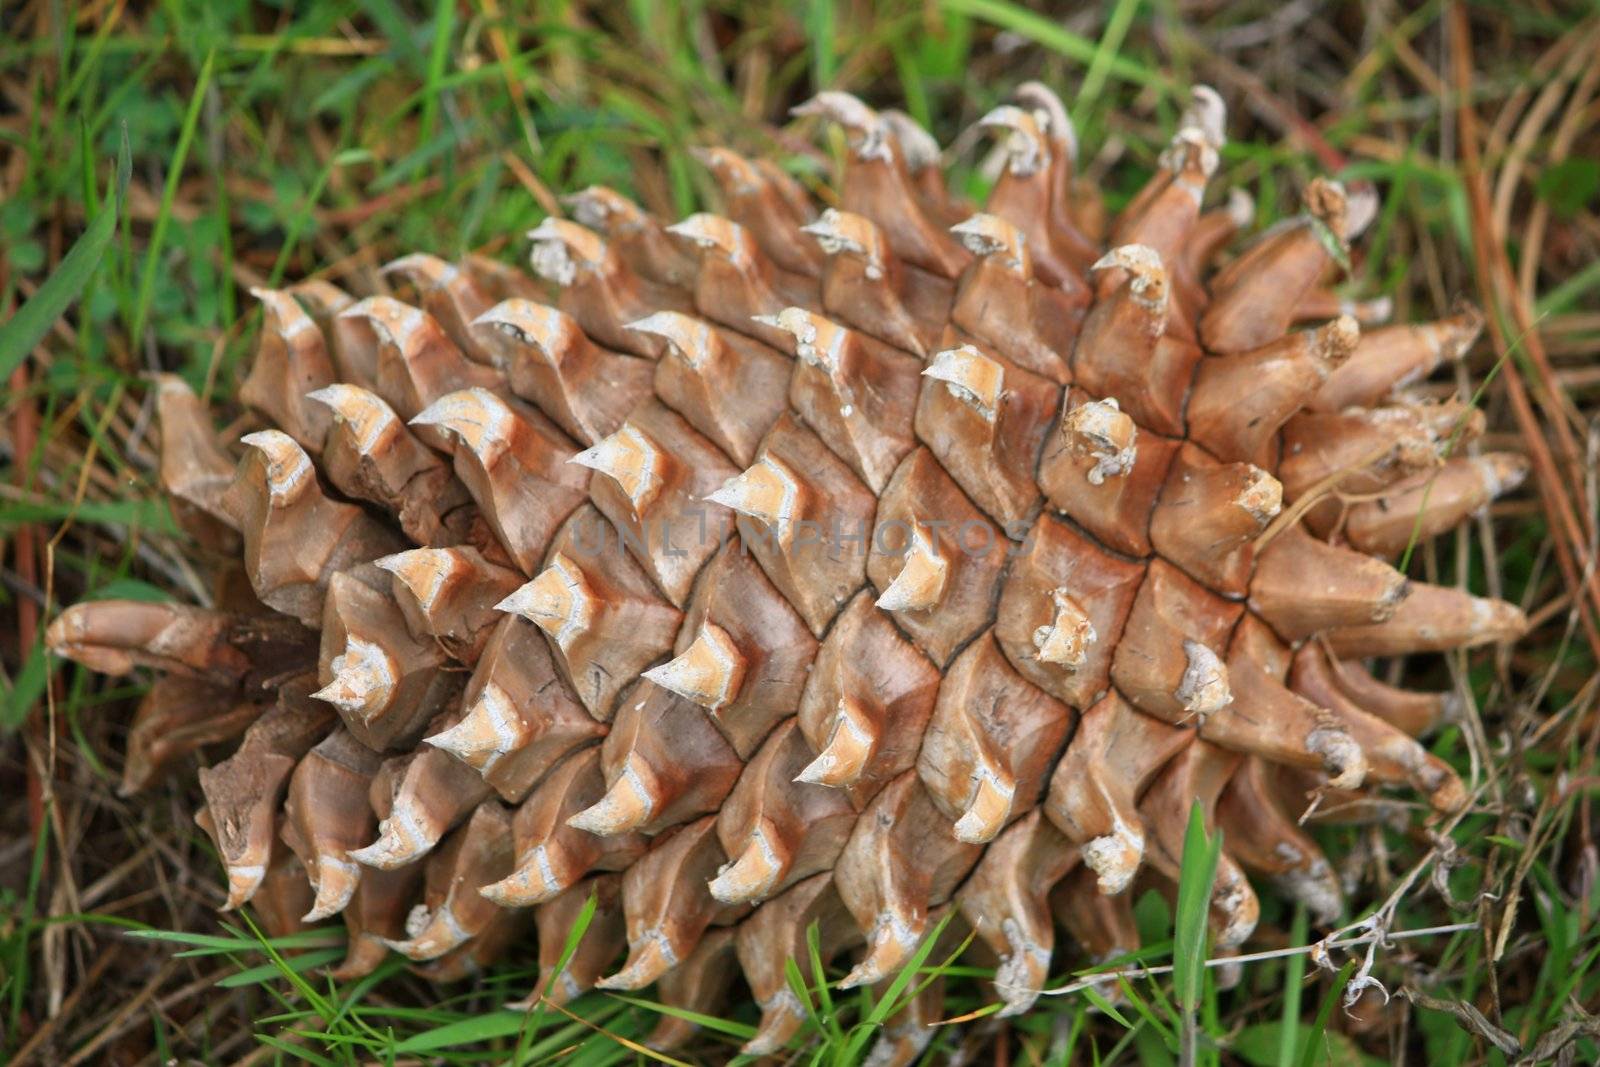 Large pointy pine cone on green grass.